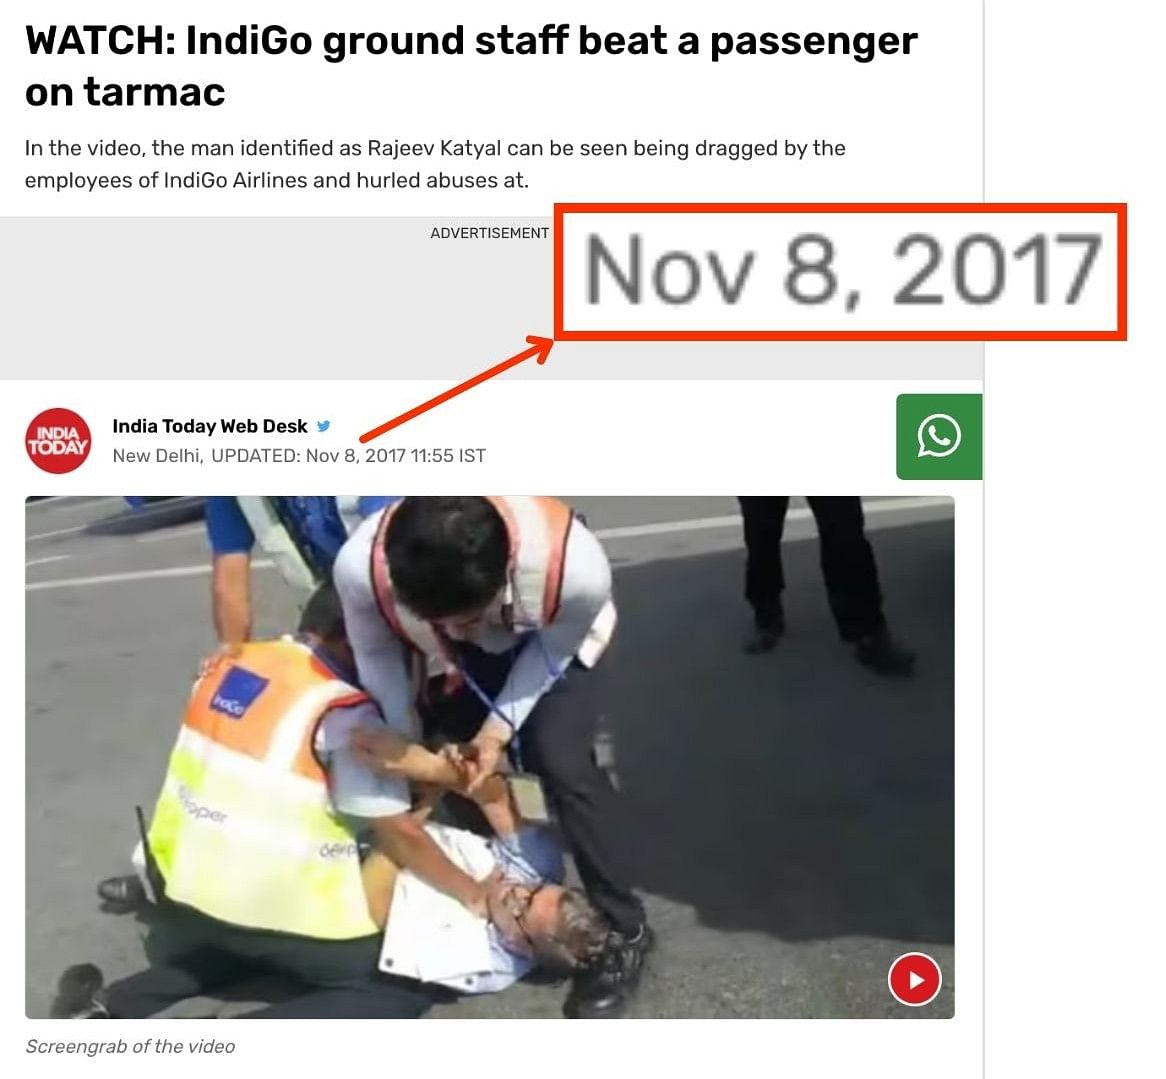 The video dates back to October 2017, when Rajeev Katyal was assaulted by IndiGo staffers at Delhi's IGI airport.